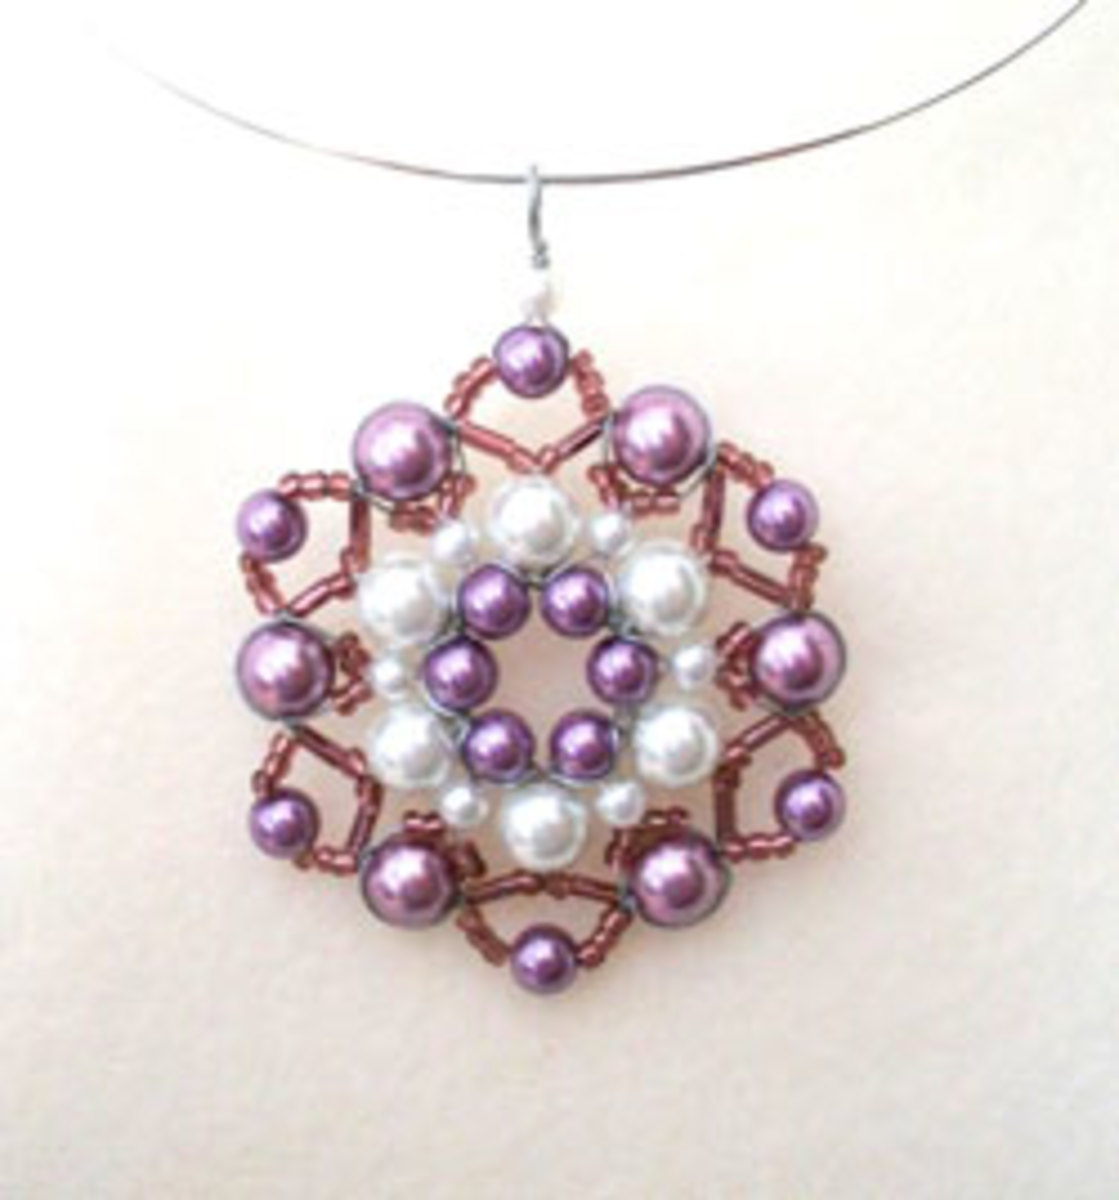 A purple beaded pendant using pearls in natural looking colours. 